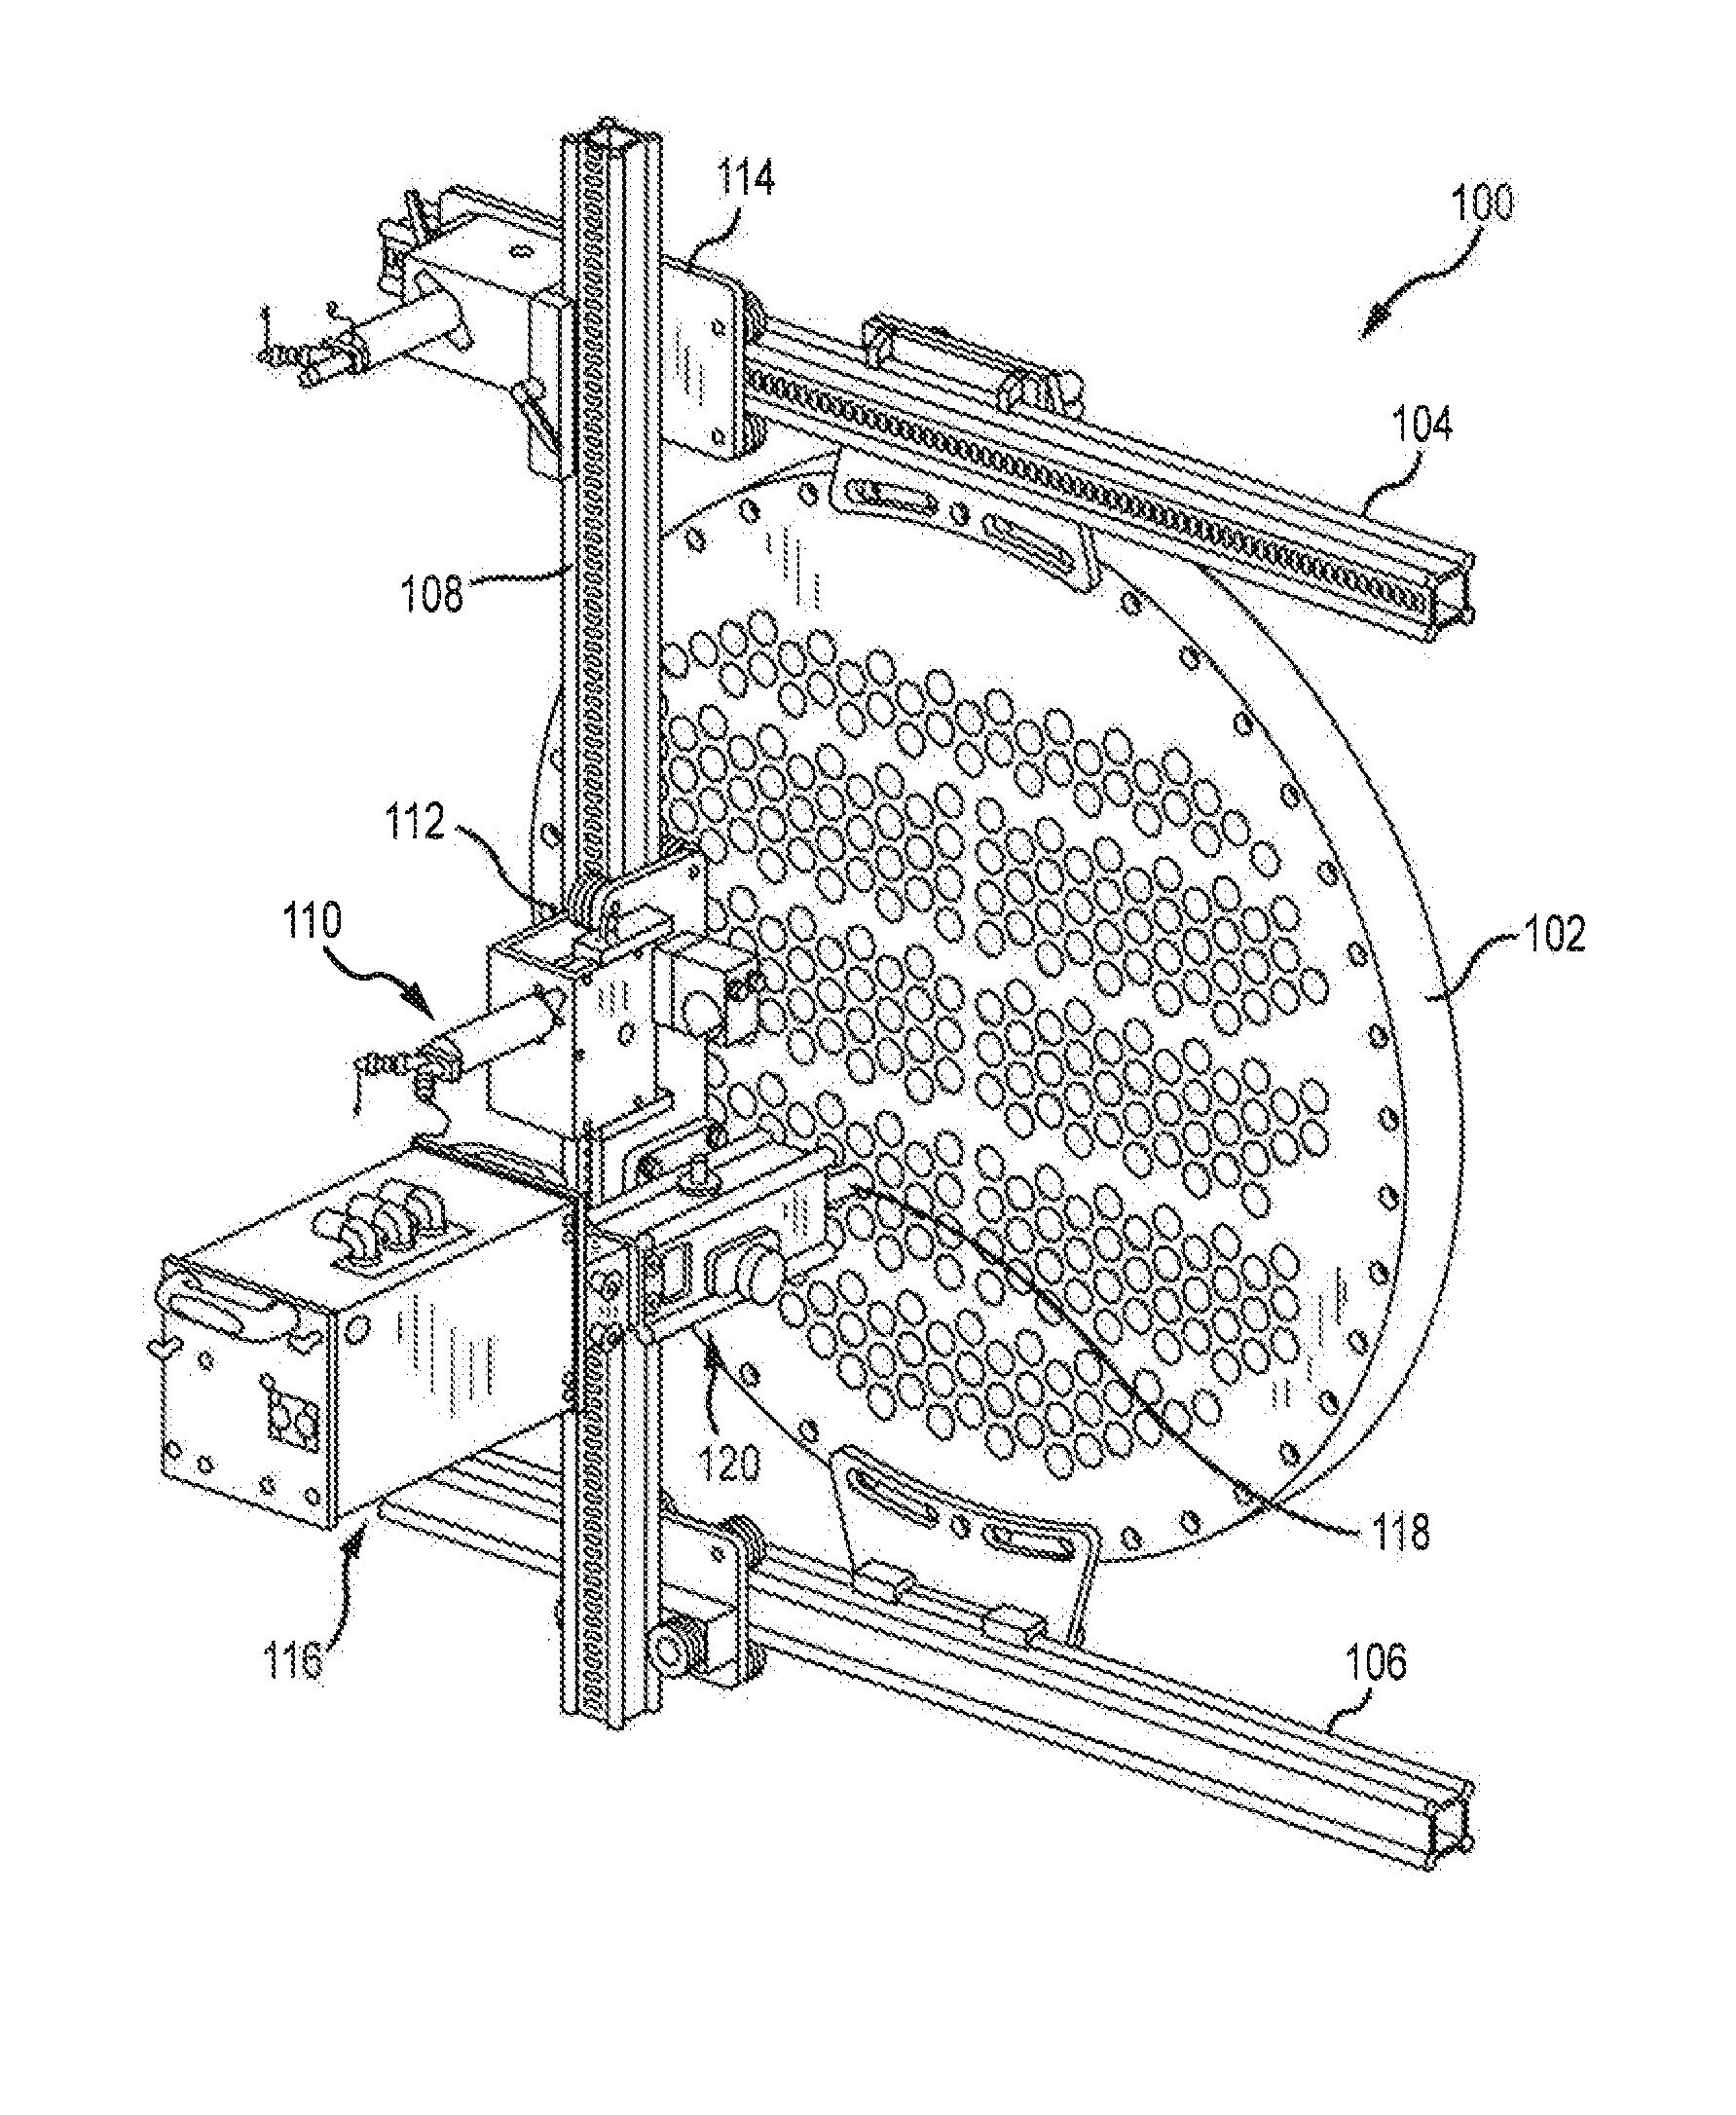 Flexible multi-tube cleaning lance positioner guide apparatus